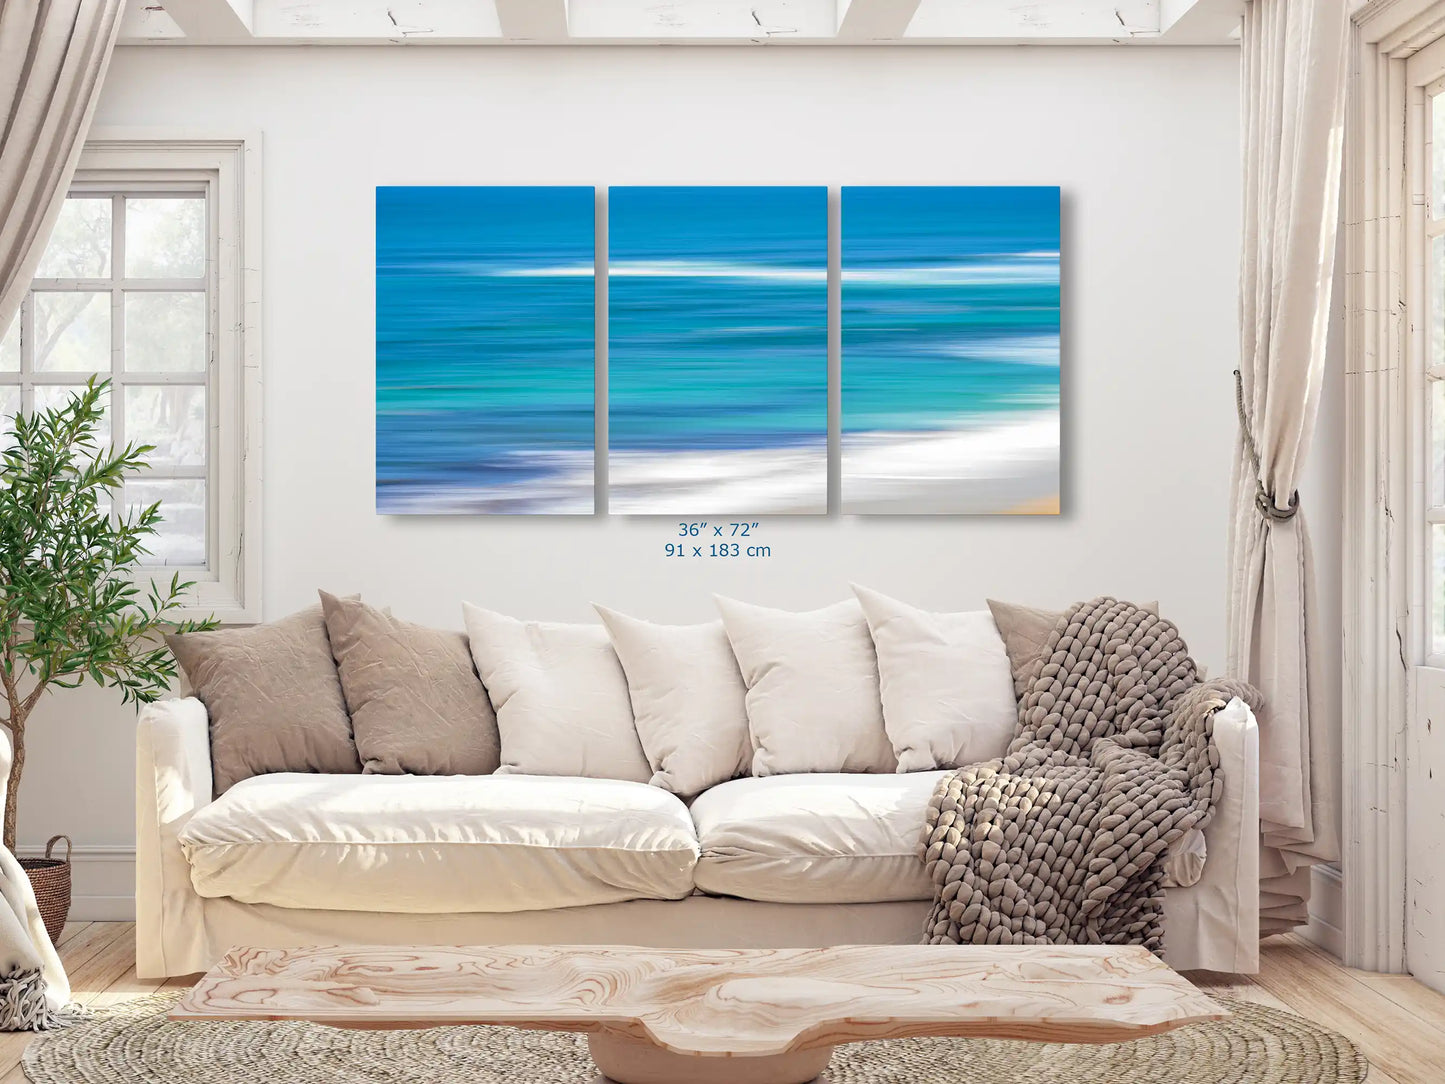 Blue Ocean abstract art in 3-piece canvas 36x72-inches over living room couch